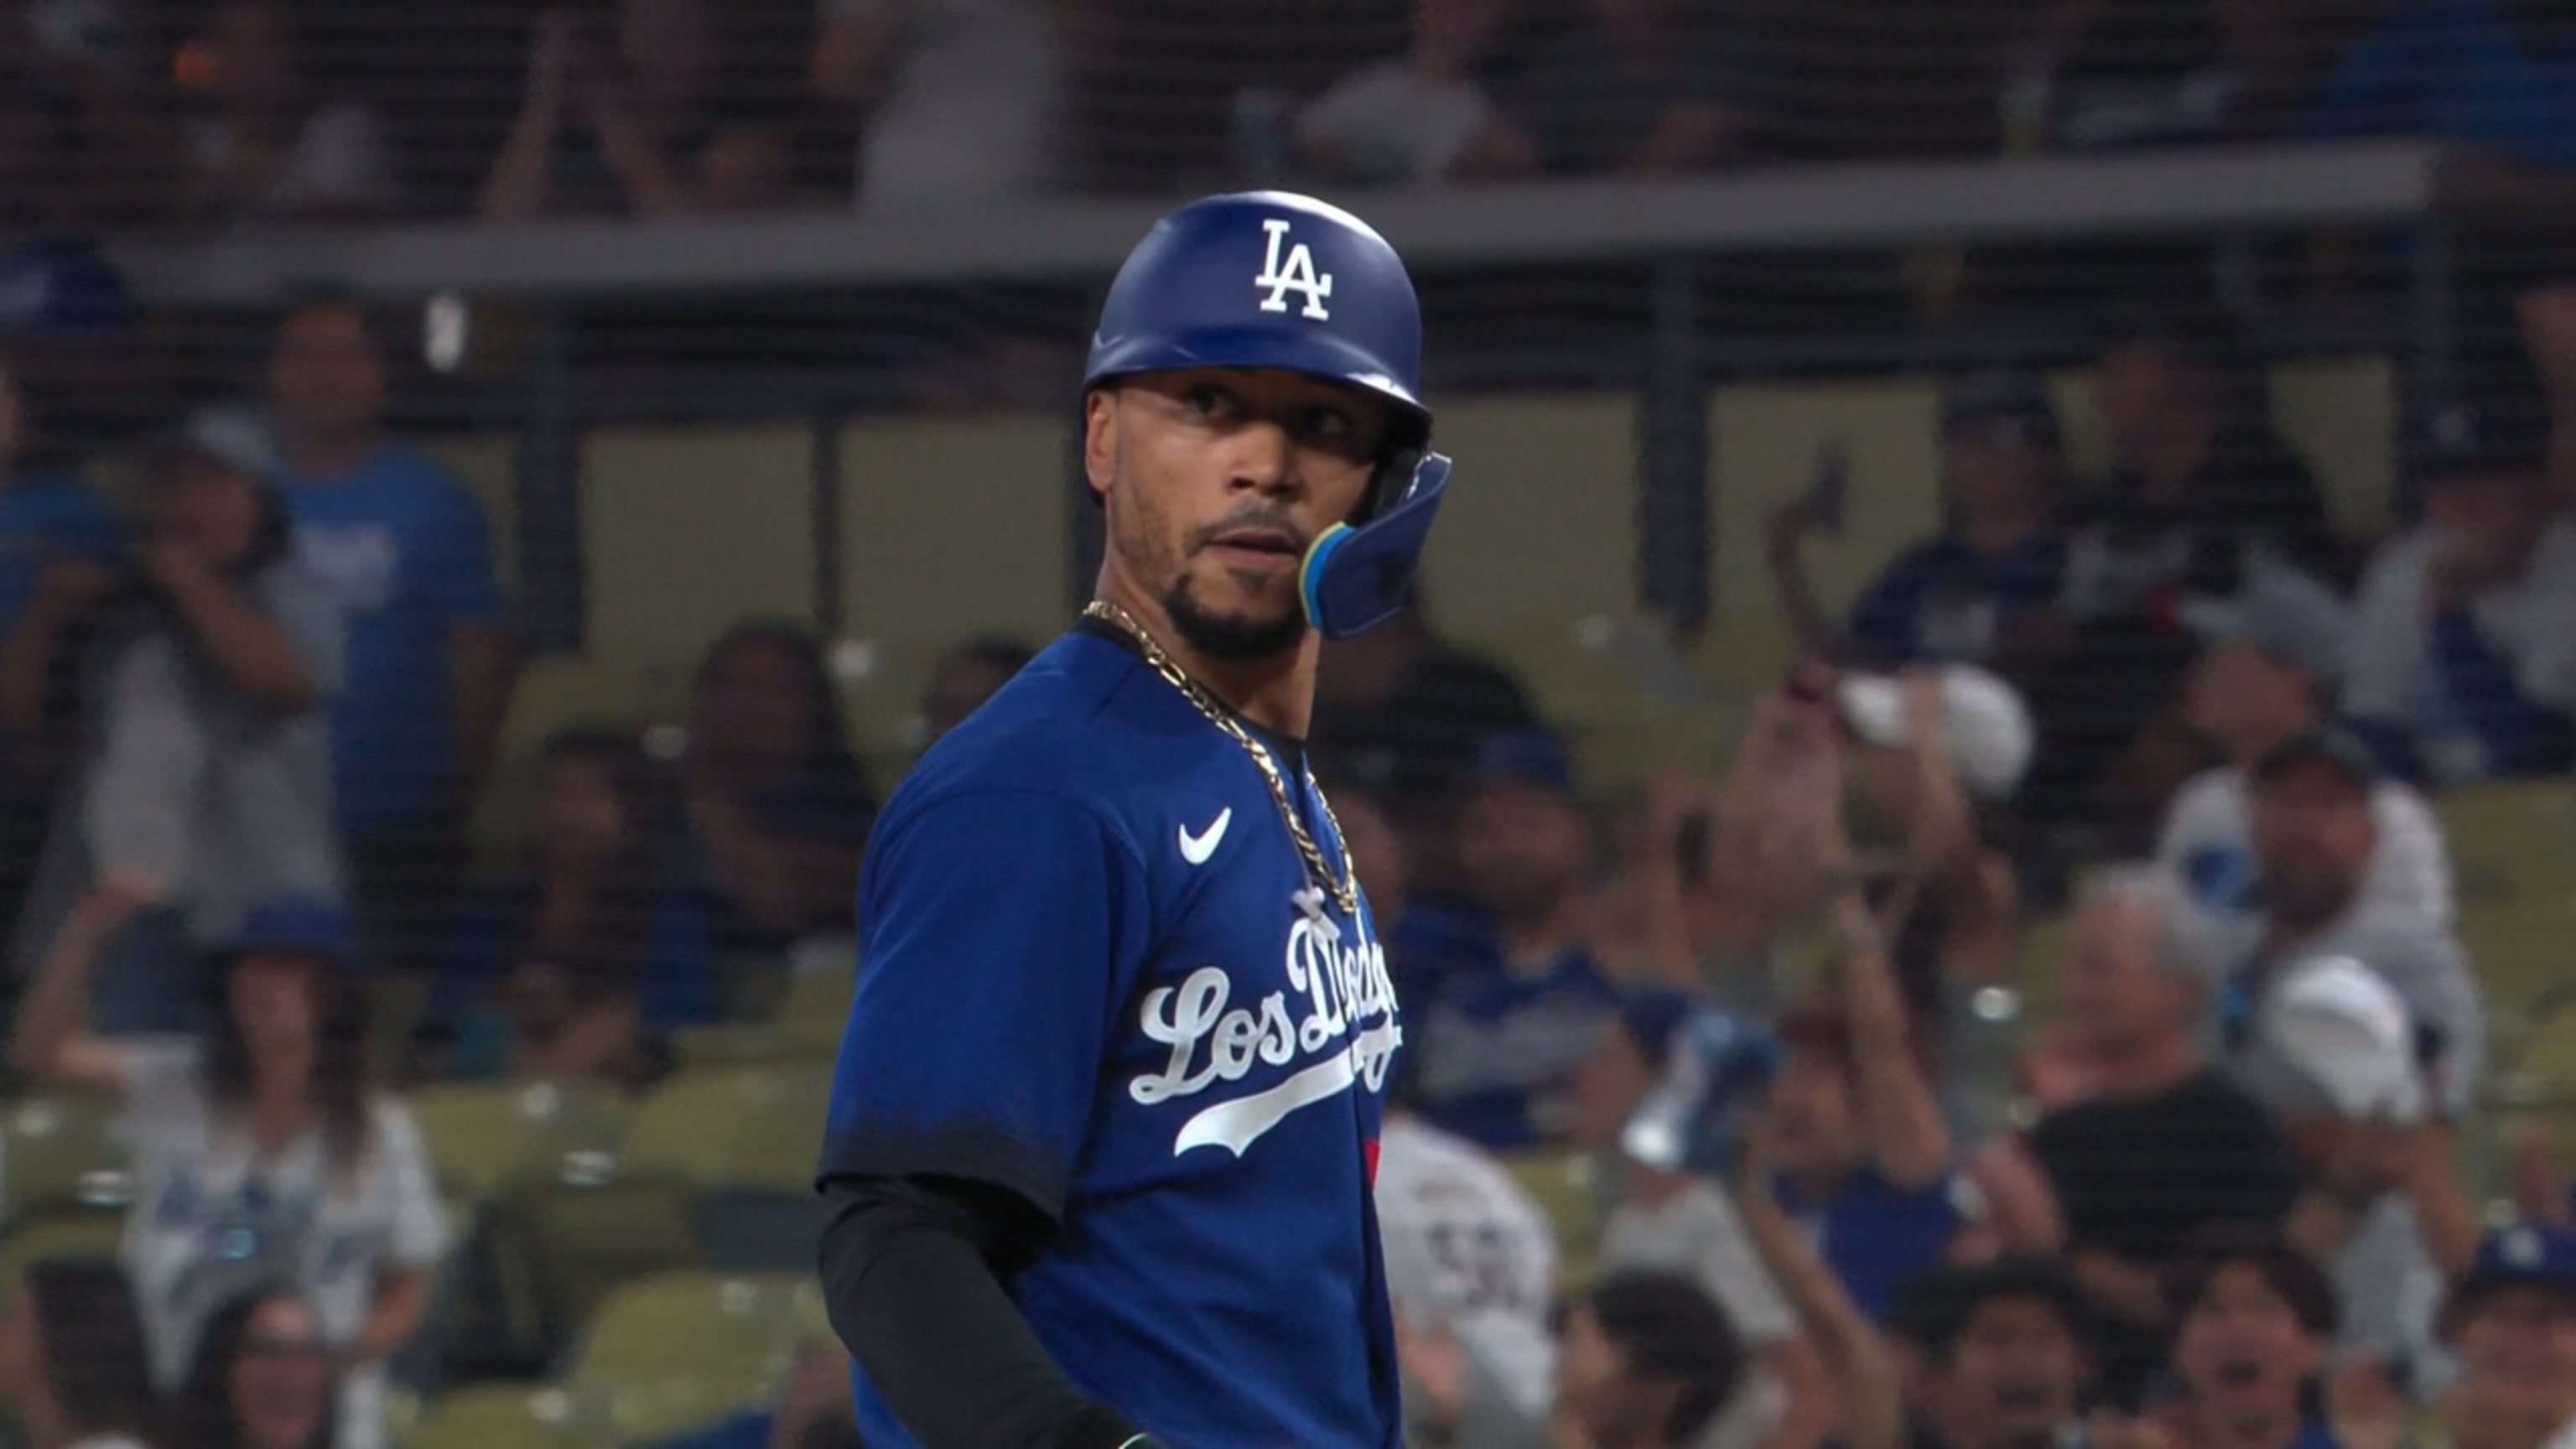 MLB jumps the gun on announcement of Dodgers' playoff berth, but